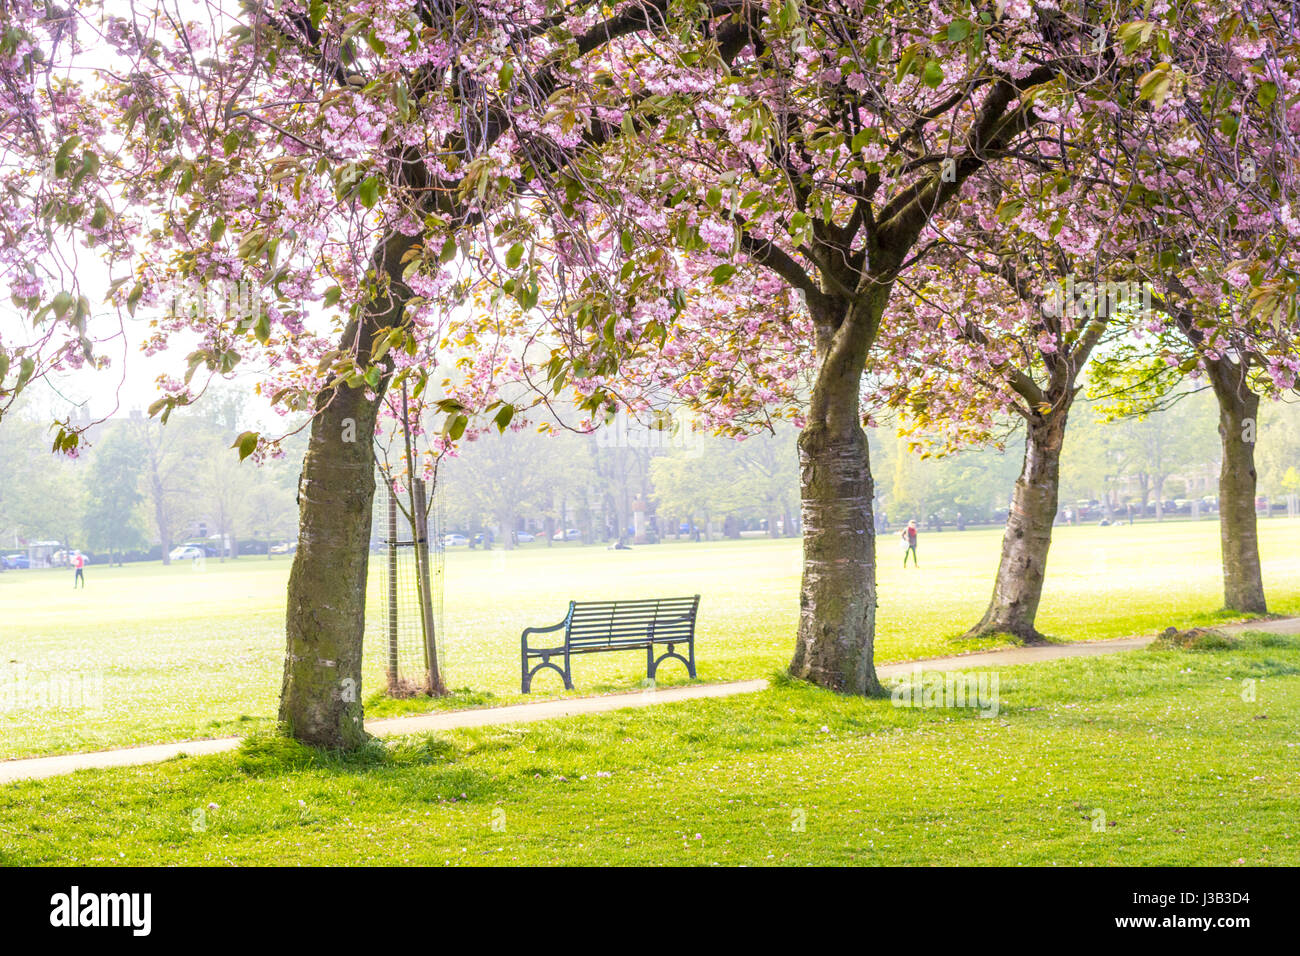 The Meadows, Edinburgh, Scotland, UK. 4th May, 2017. UK Weather. People walking and relaxing in the sunshine among beautifully blooming Japanese cherry trees. Scotland enjoys sunny, warm weather during all the week, however, it has not been raining for a long time at all. Credit: Malgorzata Larys/Alamy Live News Stock Photo